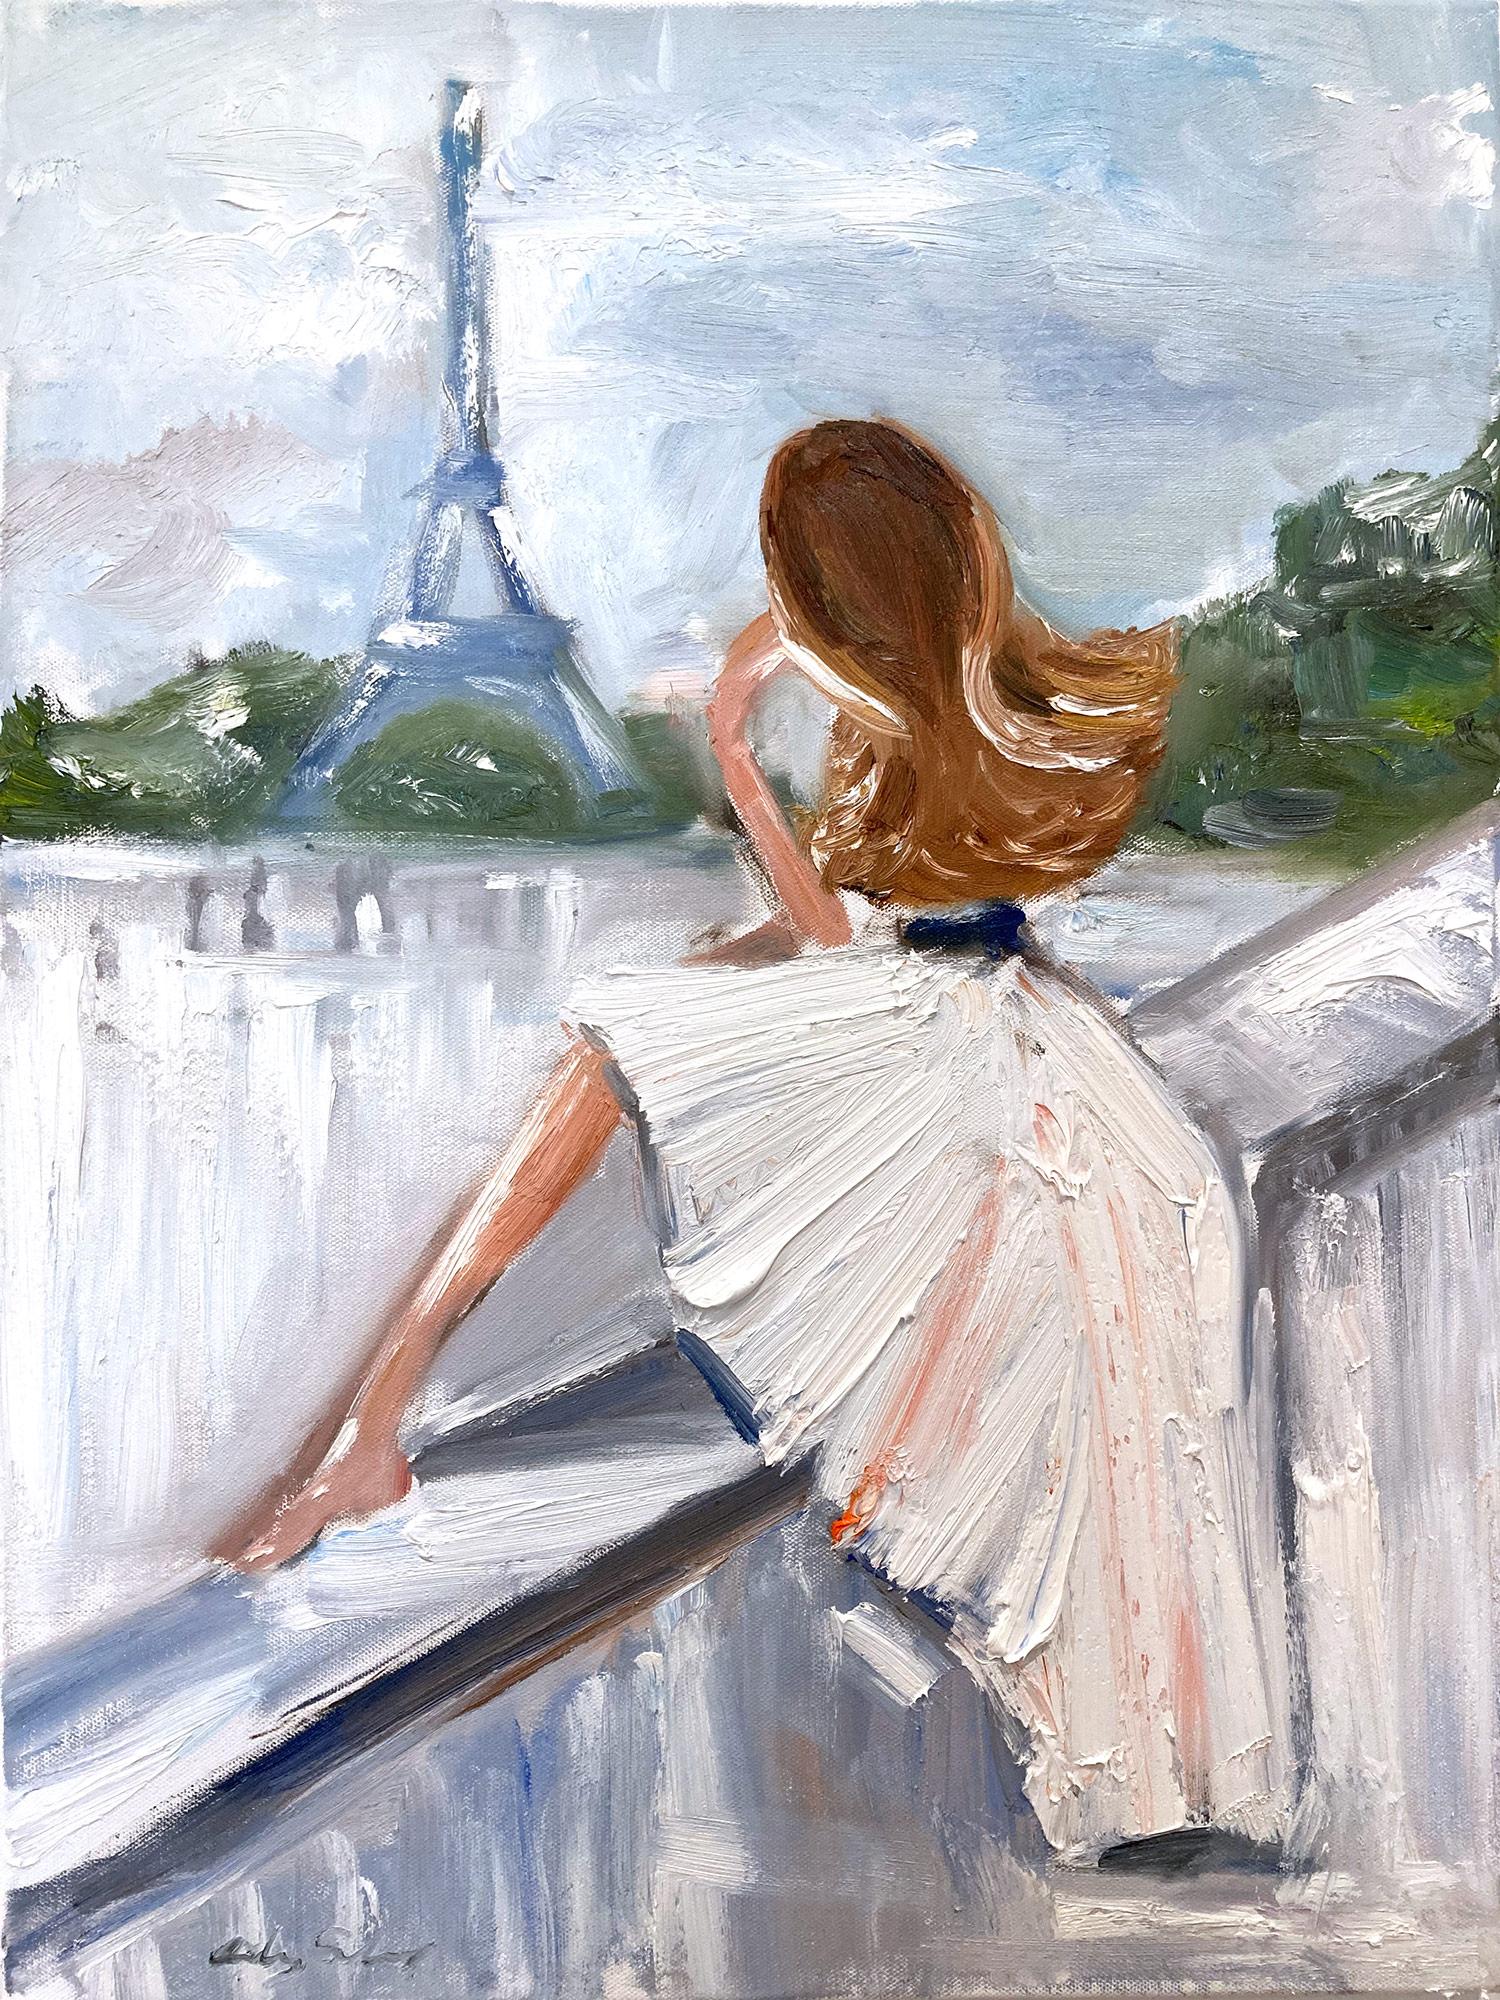 Cindy Shaoul Figurative Painting - "Paris Mood " Figure by the Eiffel Tower wearing Chanel Oil Painting on Canvas